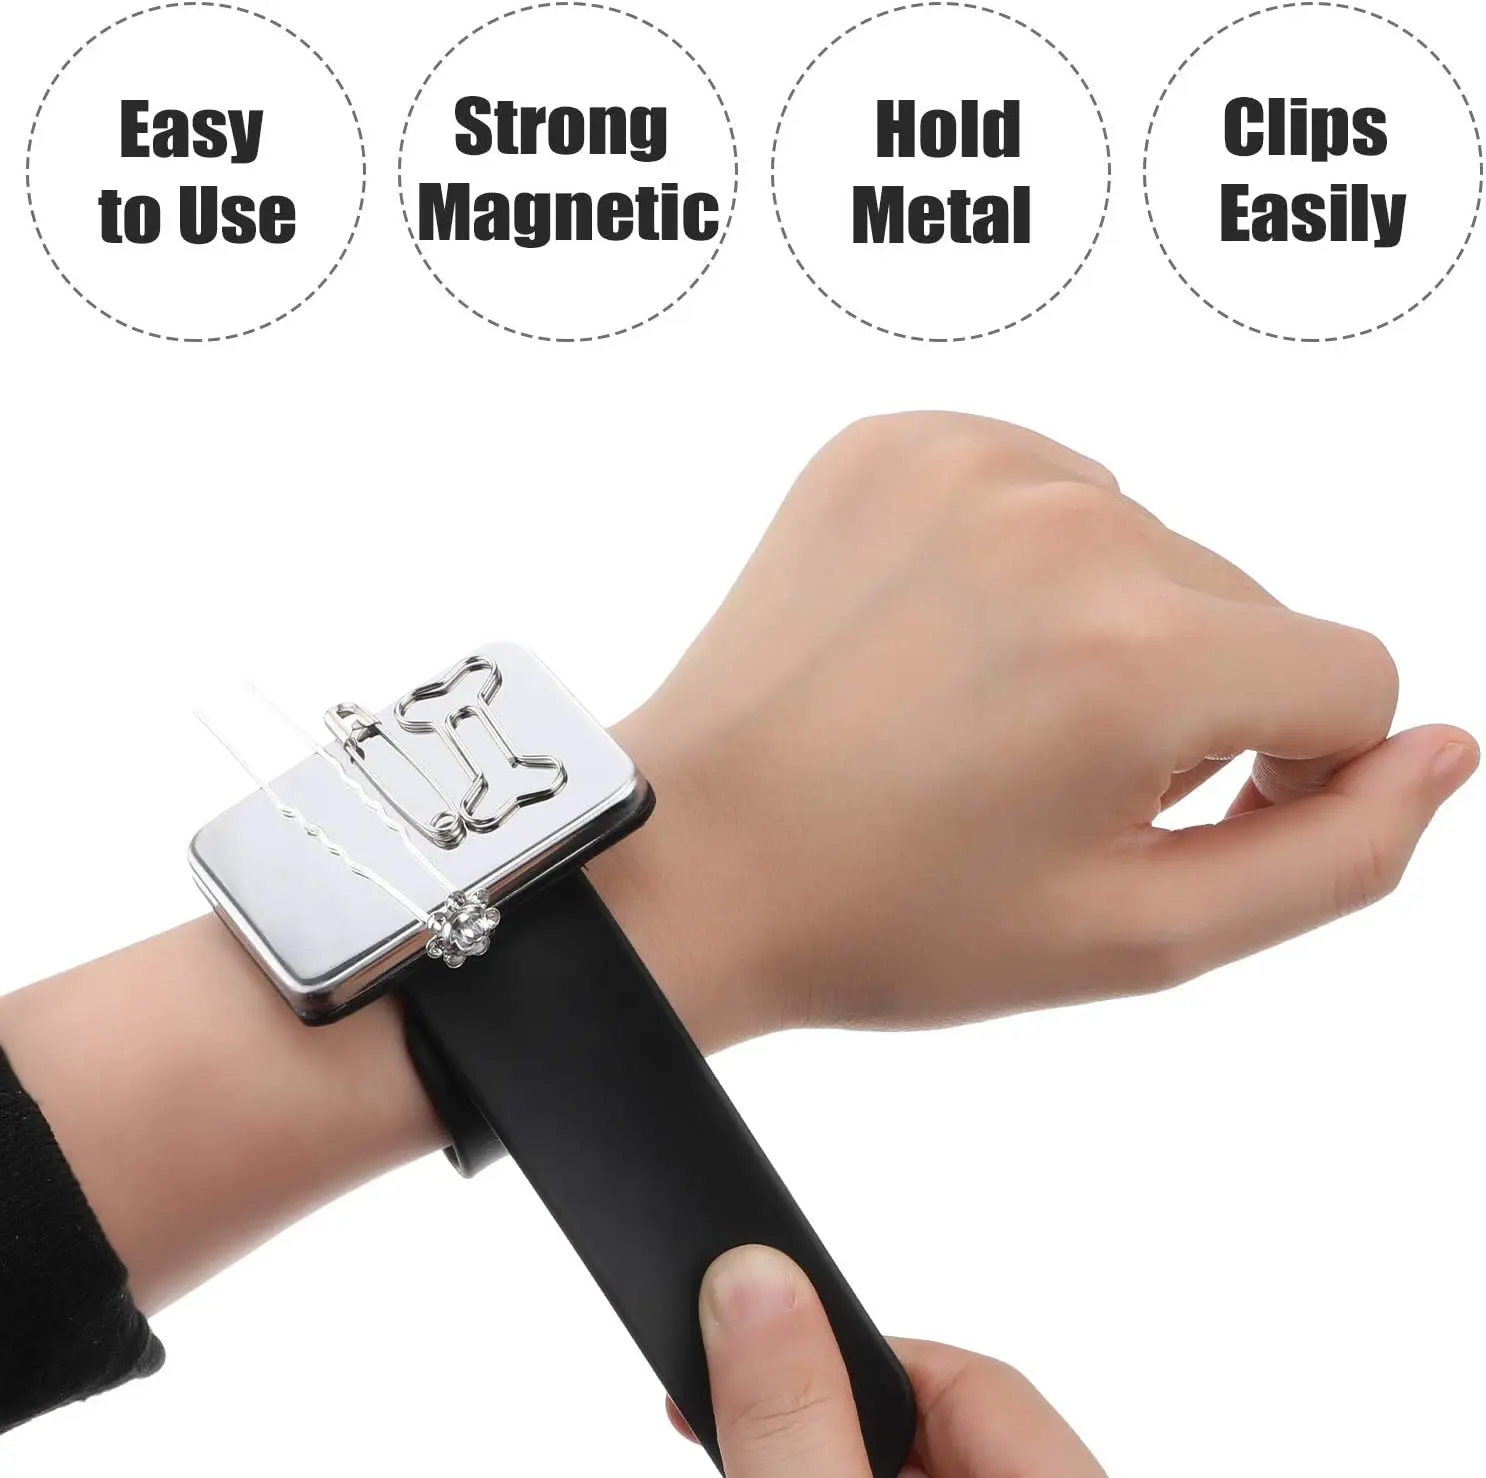 Professional Magnetic Bracelet Wrist Band Strap Salon Hair Accessories Hair Clip Holder Barber Hairdressing Styling Tools for xiaomi mi band 3 4 watch strap natural stones watch band replacement wrist band bracelet khaki